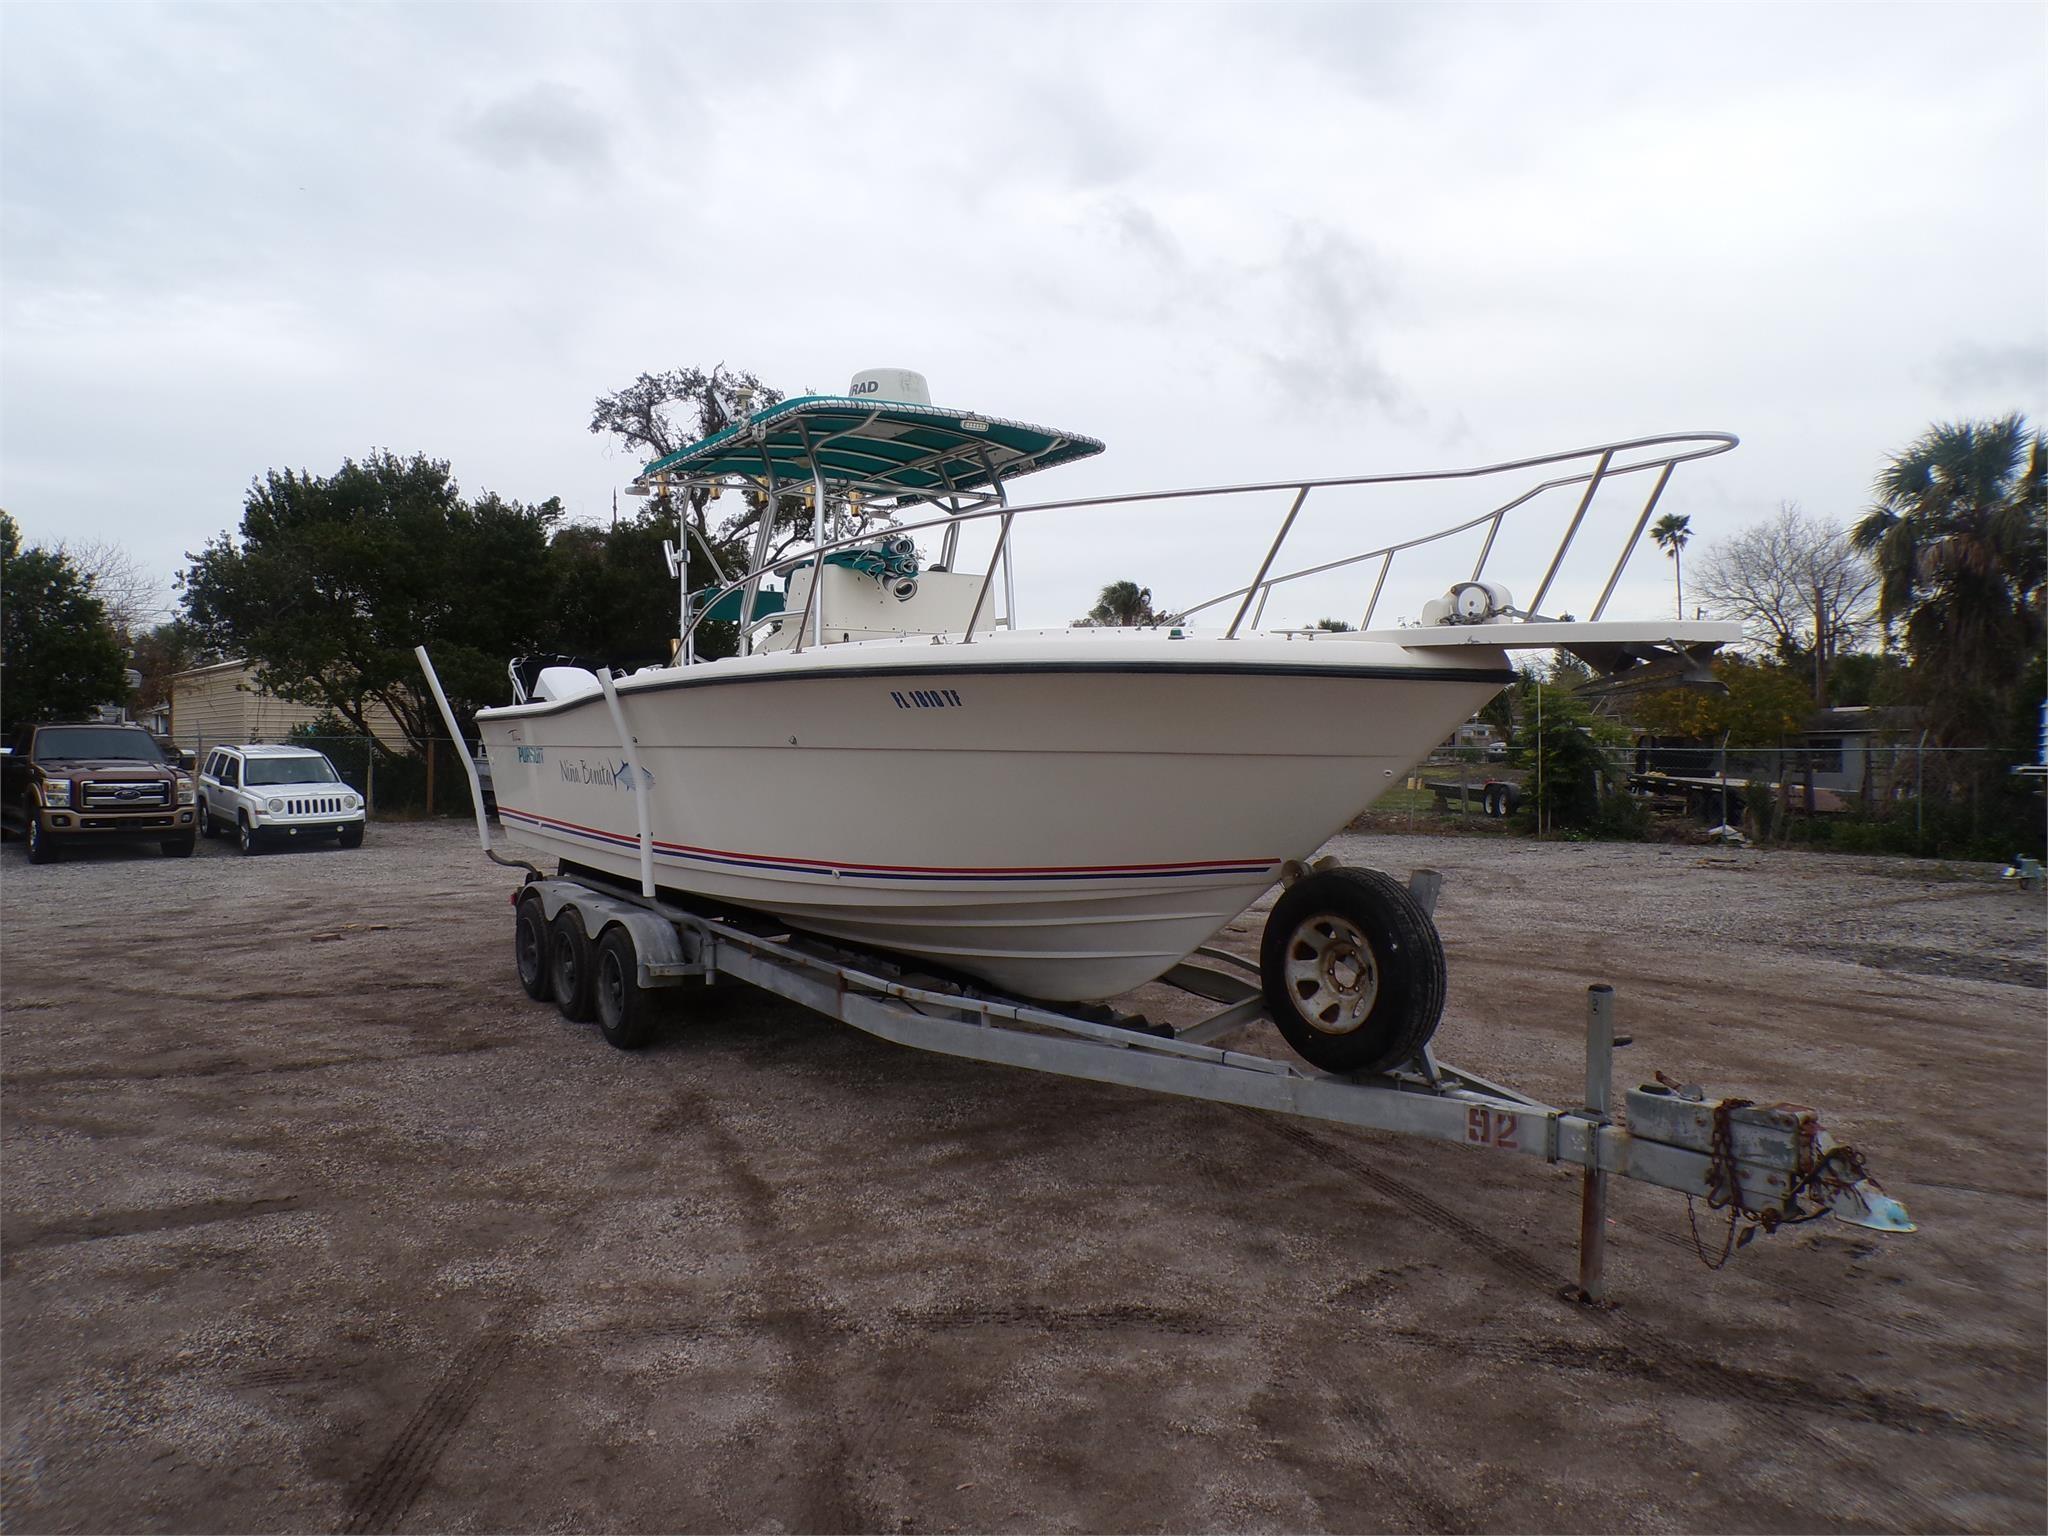 Page 13 of 226 - Used sports fishing boats for sale - boats.com